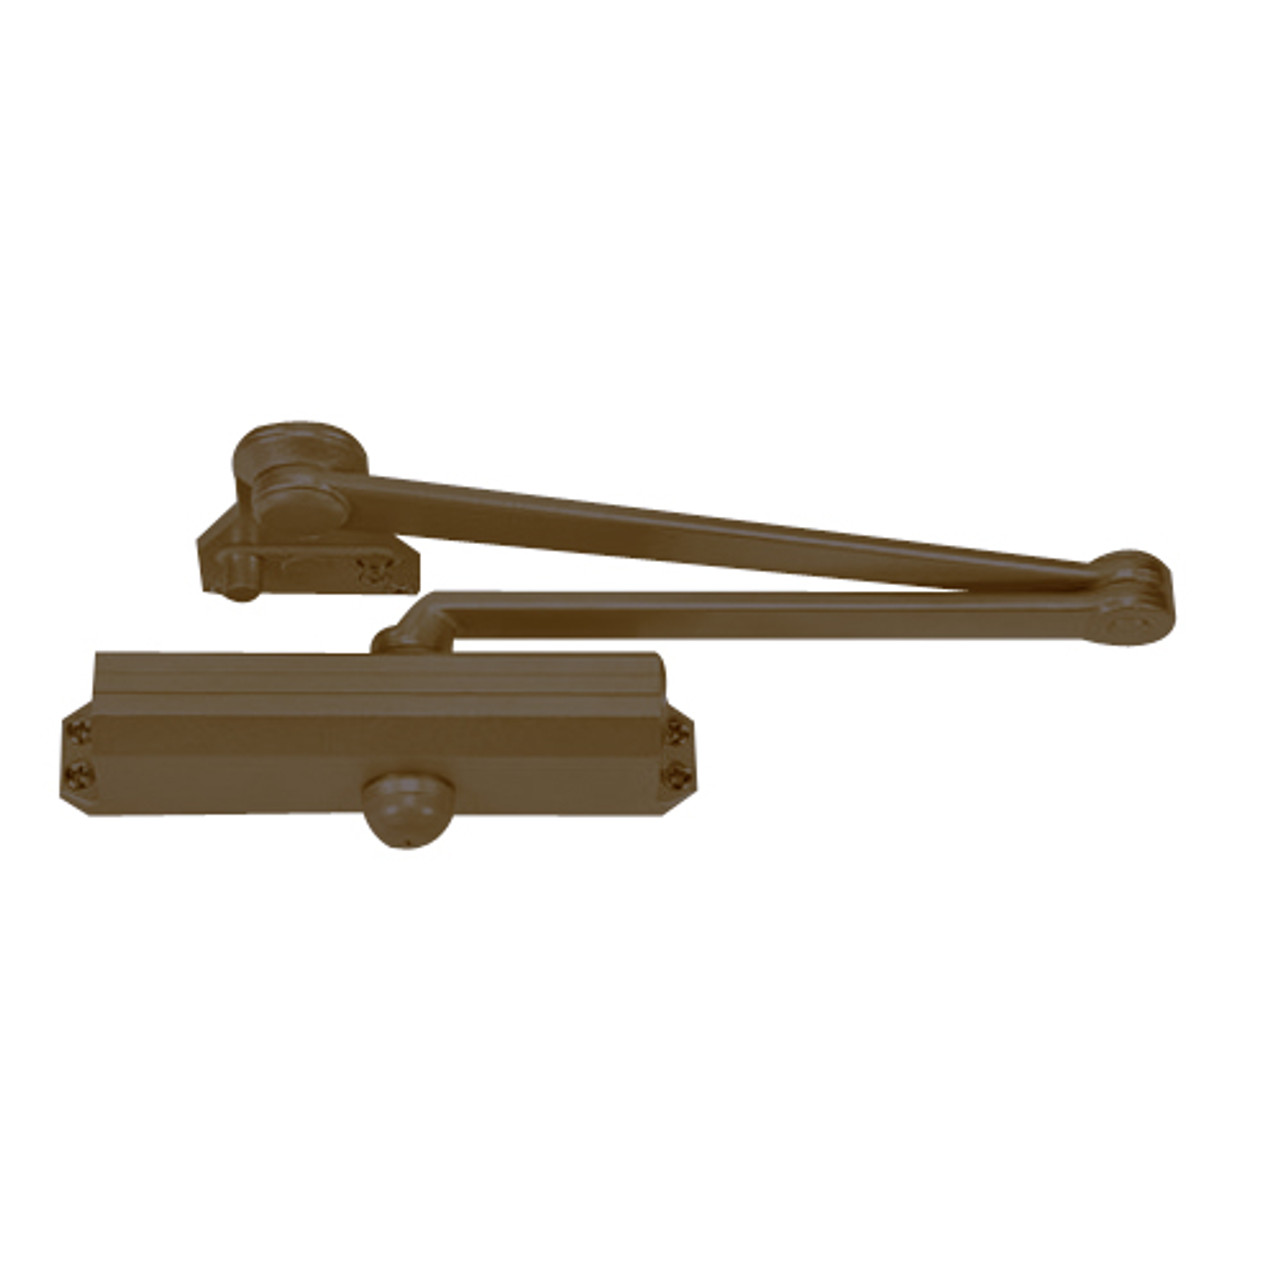 CPS1601-690 Norton 1600 Series Non Hold Open Adjustable Door Closer with CloserPlus Spring Arm in Statuary Bronze Finish